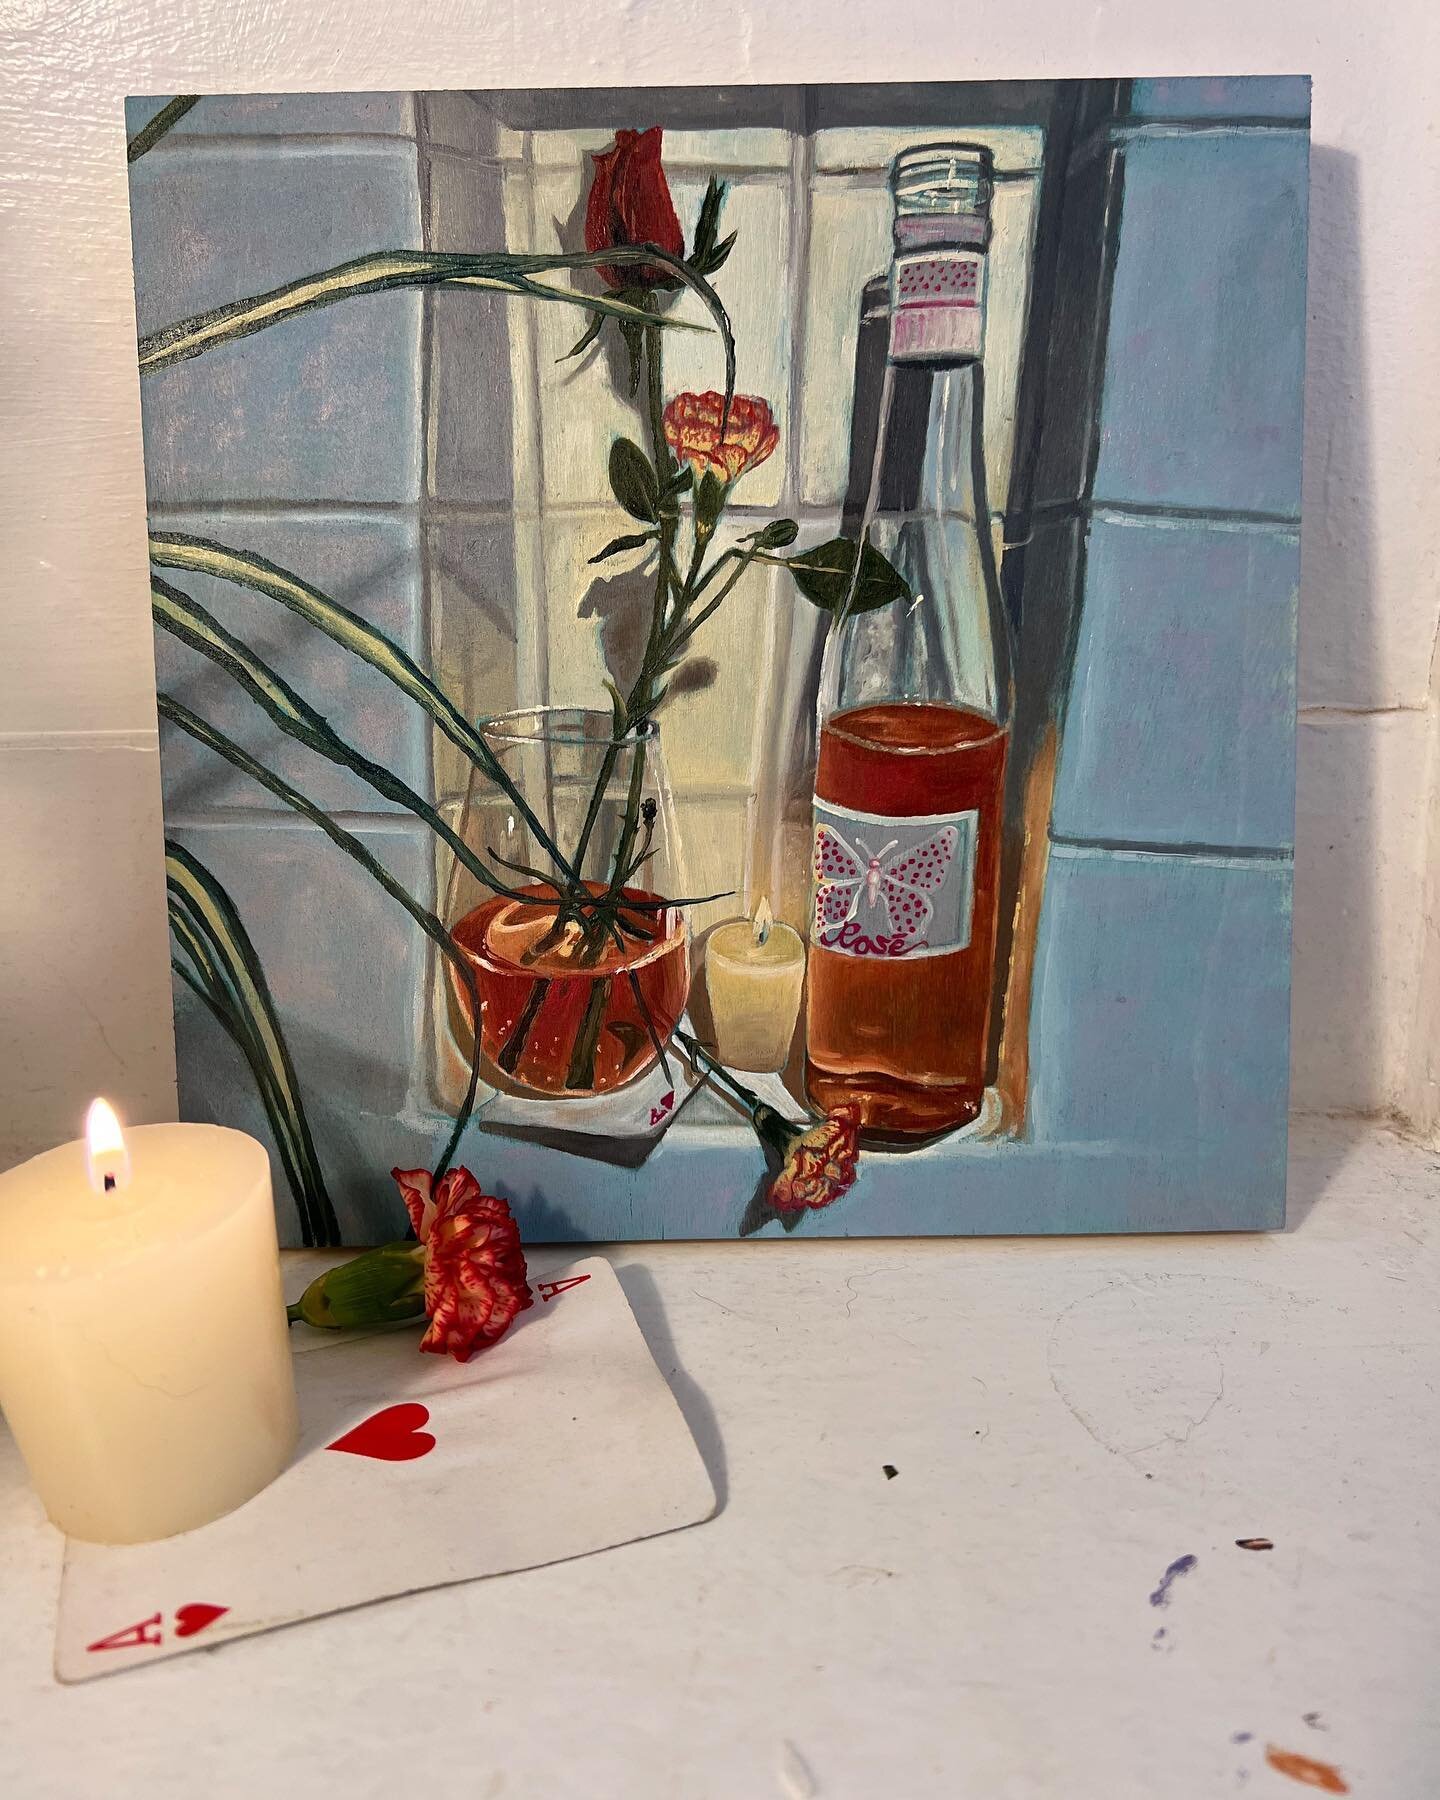 Another piece for the @artcentralslo &ldquo;Flowers and Flutterbys&rdquo; show in April 🌹oil on wood panel, swipe for reference pic!

.
.
.
.
.
.
.
.
.
#oilpainting #oilpaintings #oilartist #flowers #ros&eacute; #roses #candles